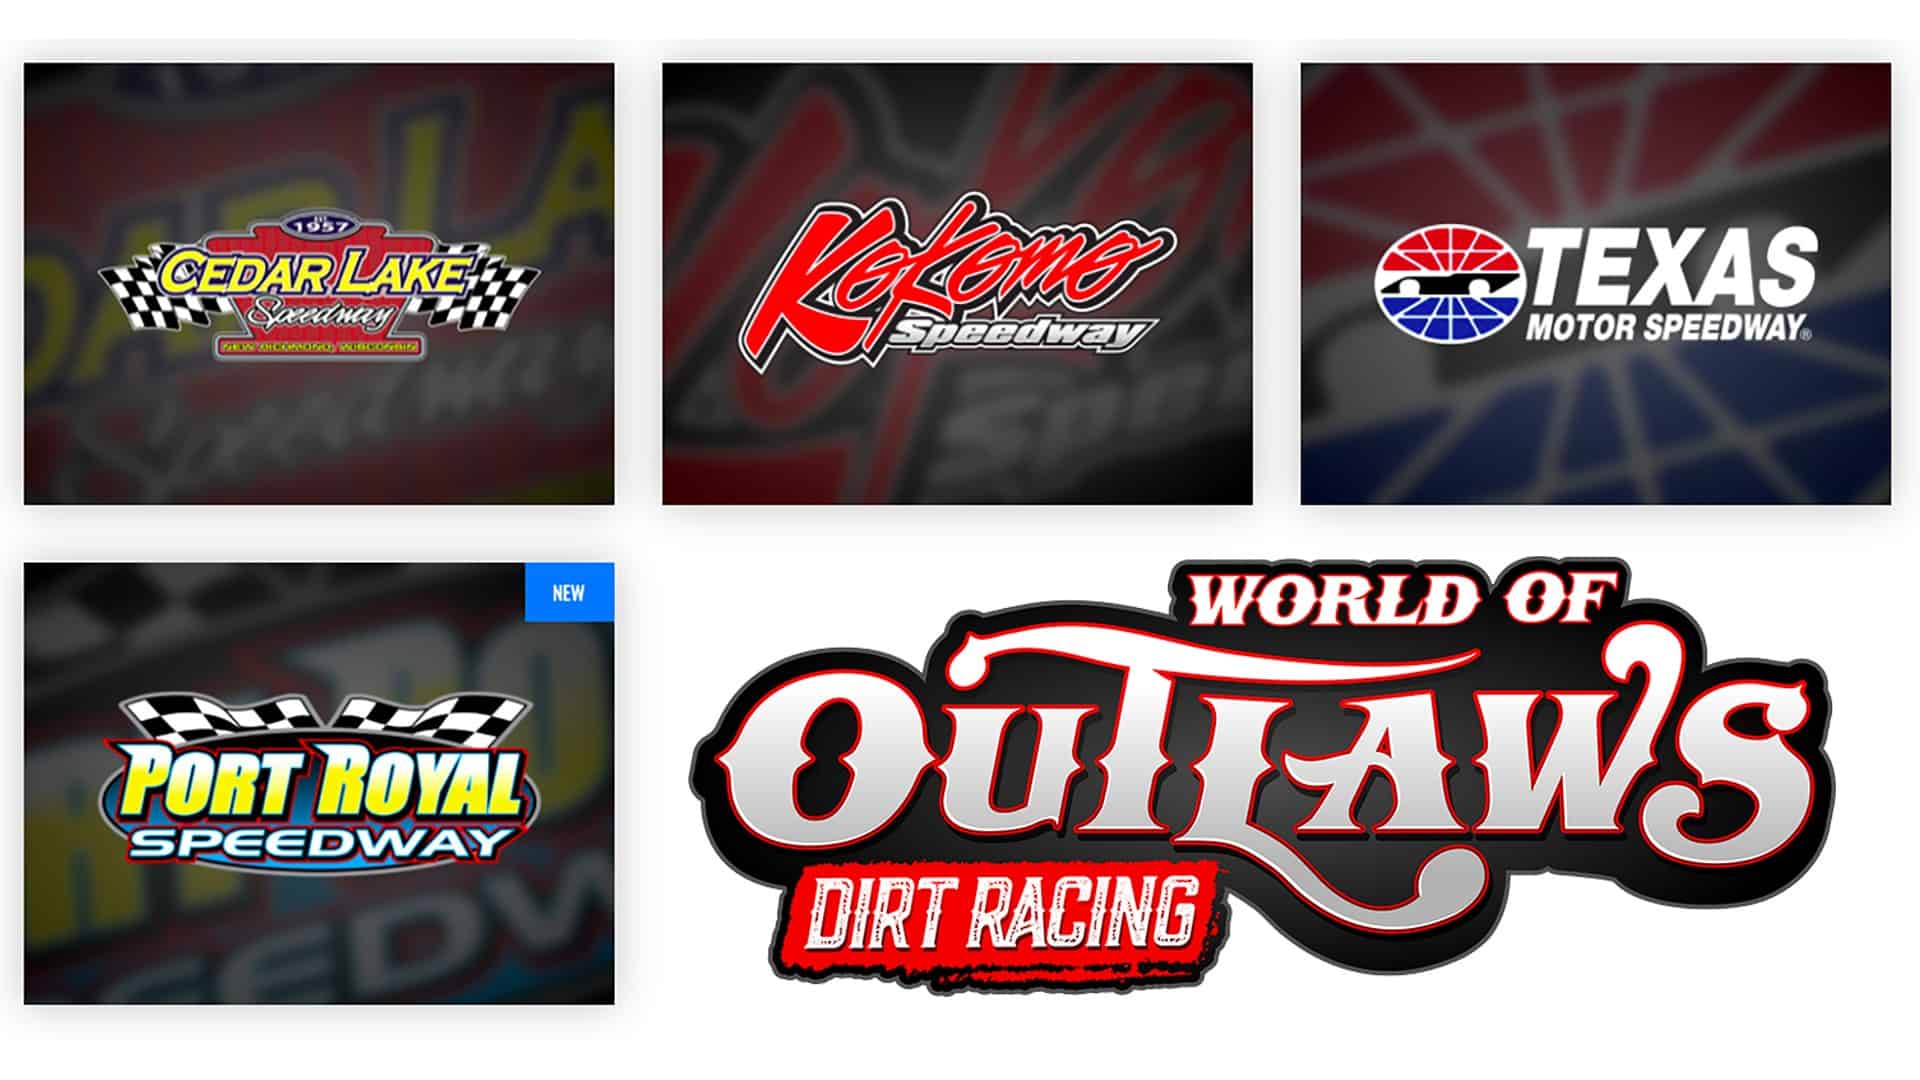 World of Outlaws Dirt Racing announces more tracks including Port Royal